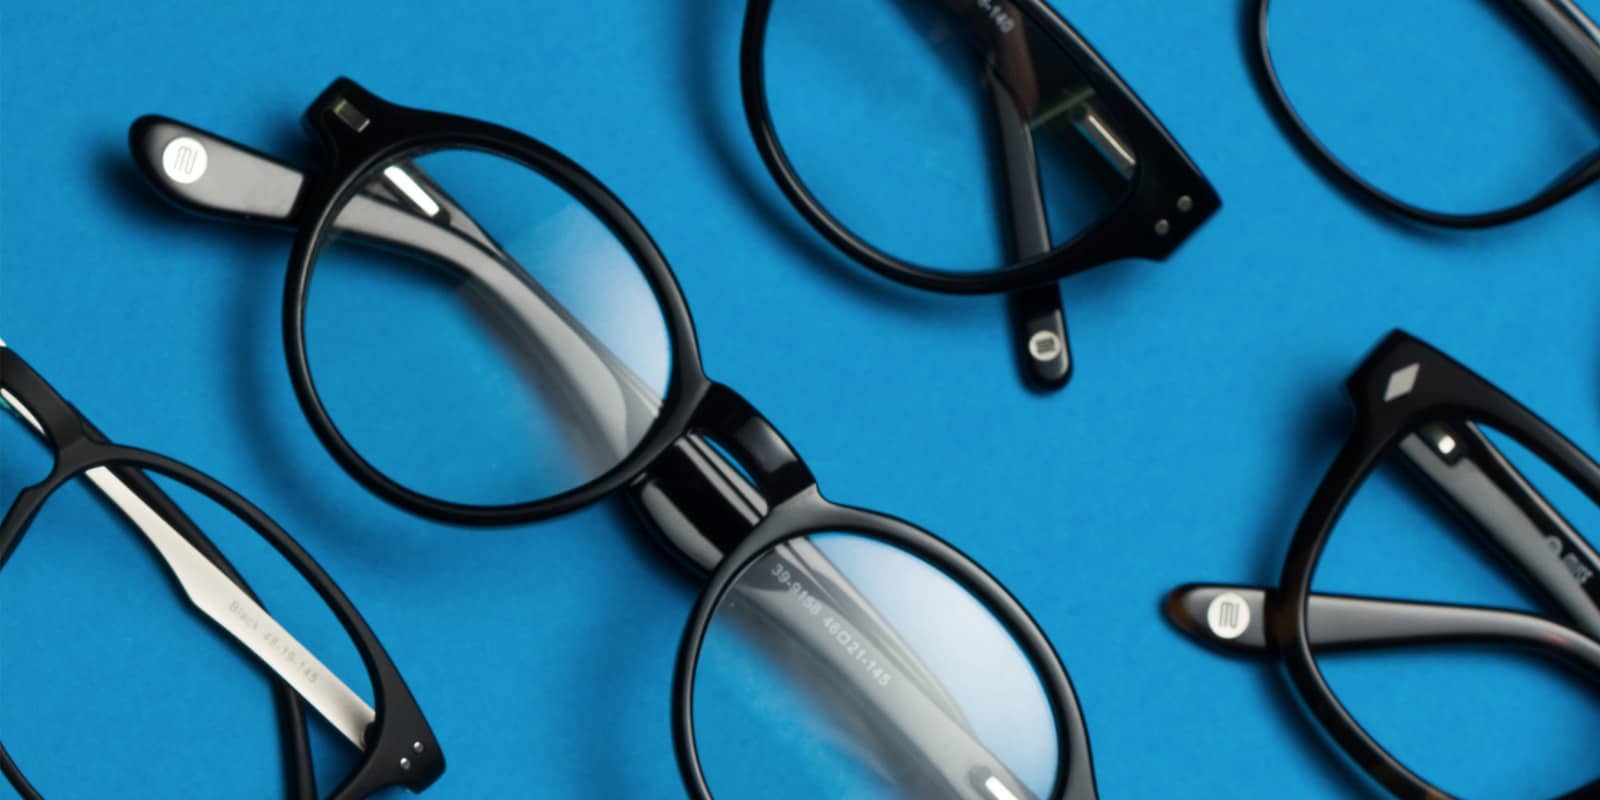 GlassesUSA: The perfect holiday gift for yourself (or anybody else who stares at a screen all day).